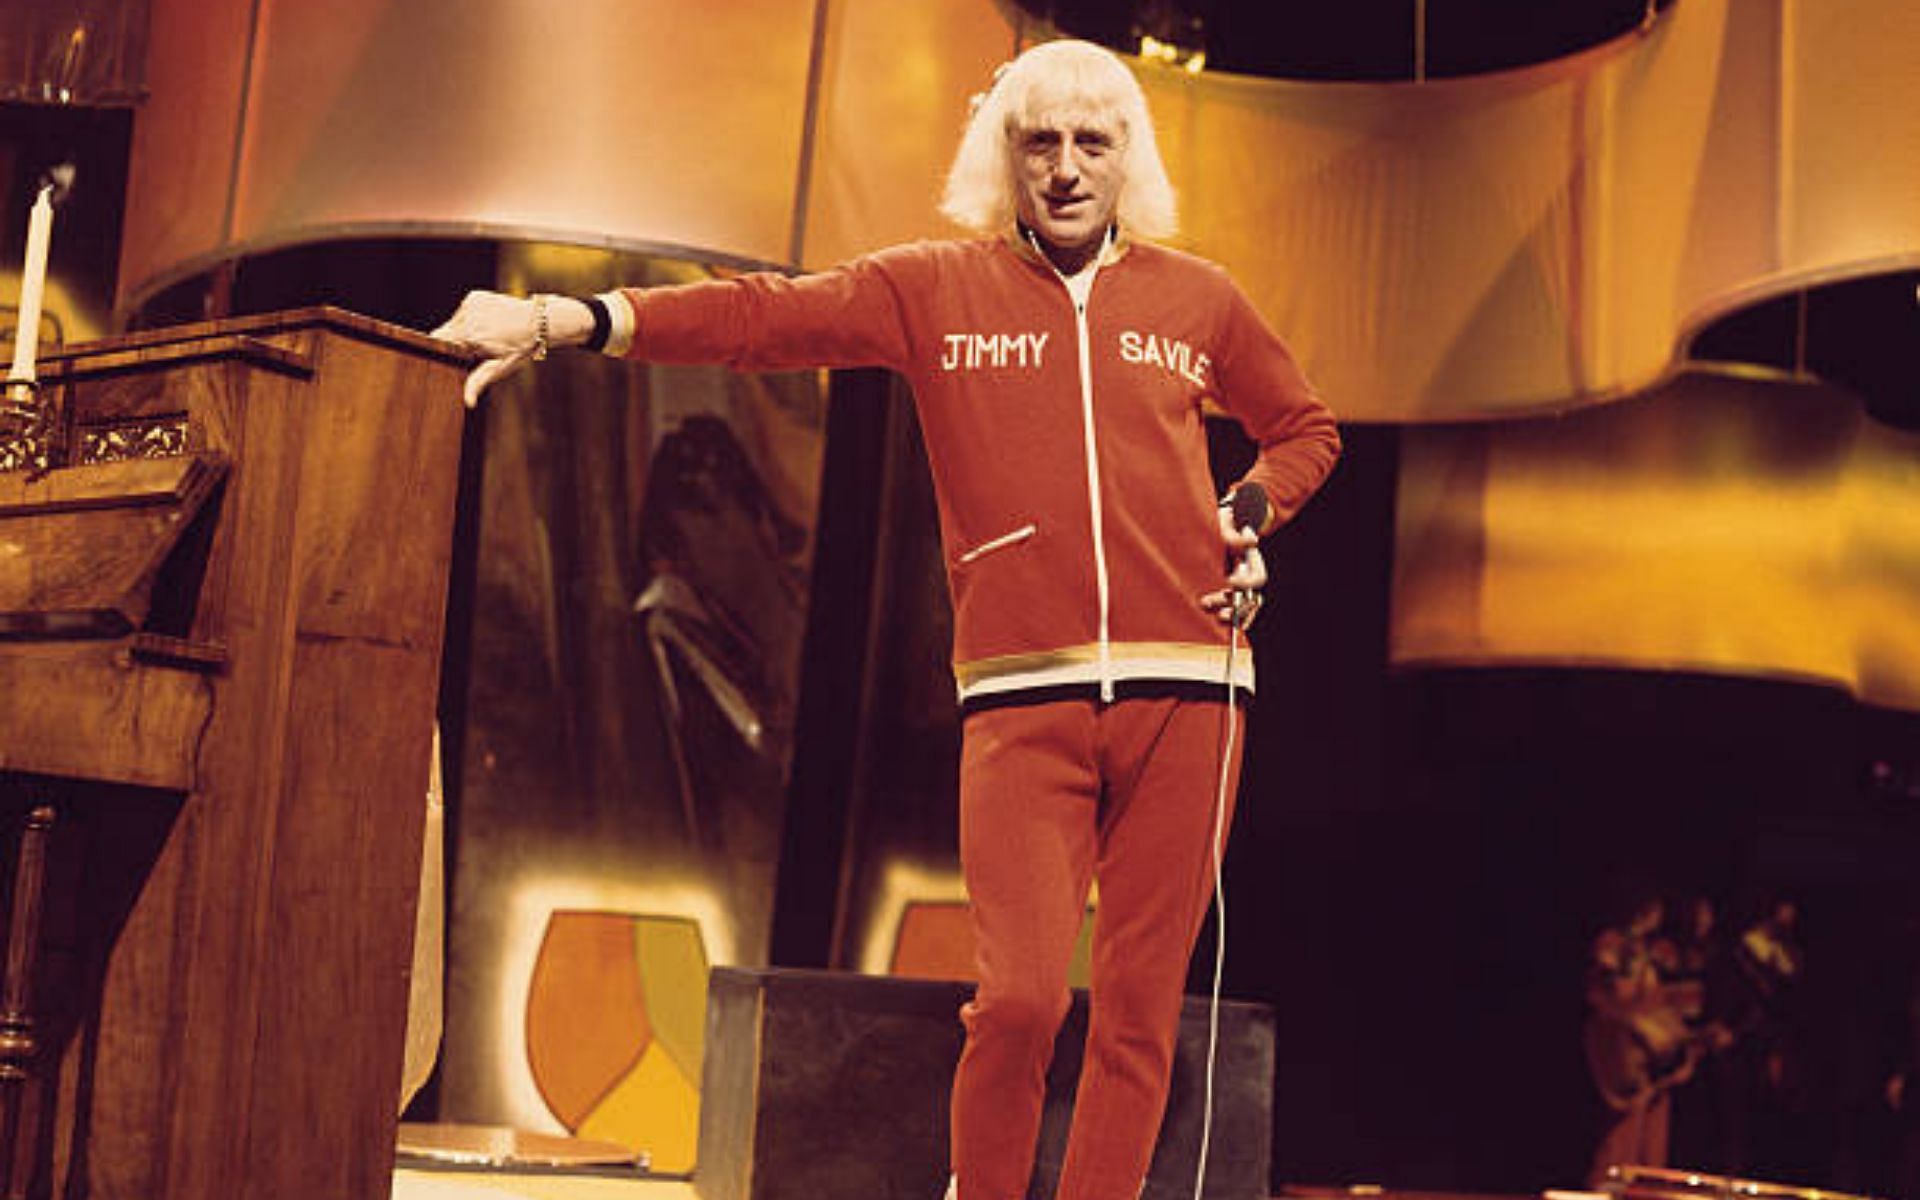 Savile presenting the BBC music chart show Top Of The Pops in 1973 (Image via Michael Putland/Getty Images)